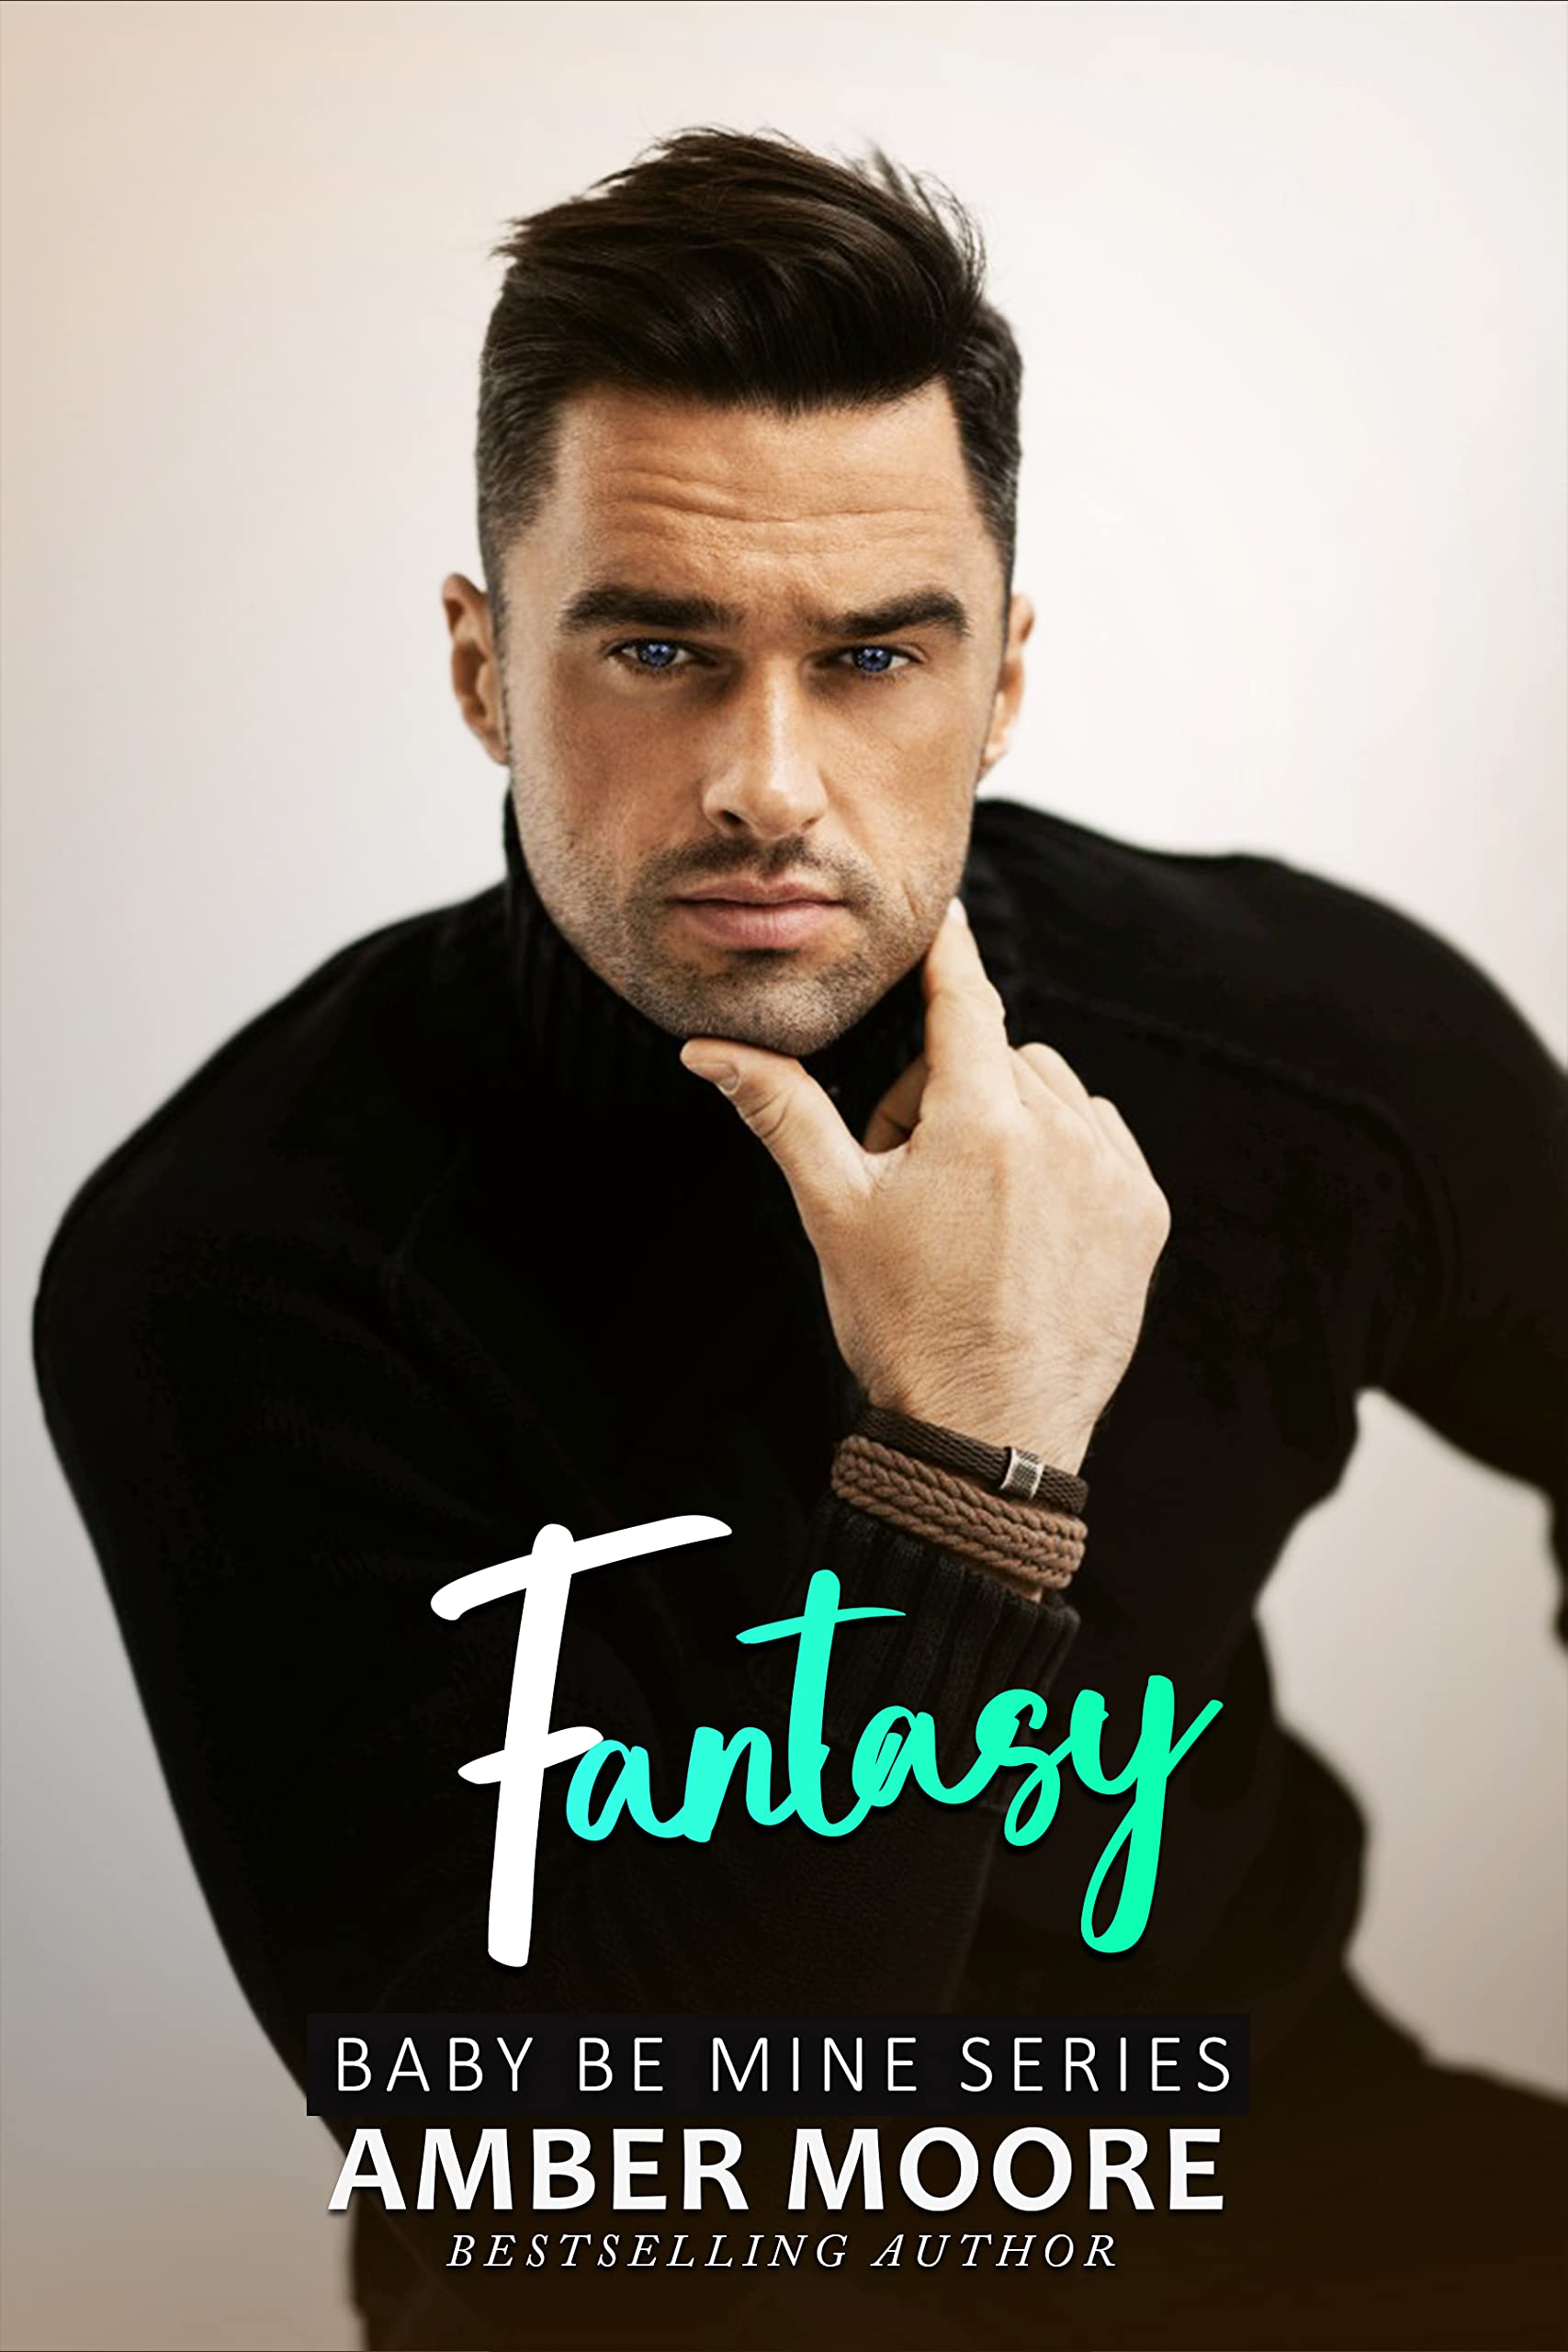 Fantasy by Amber Moore PDF Download